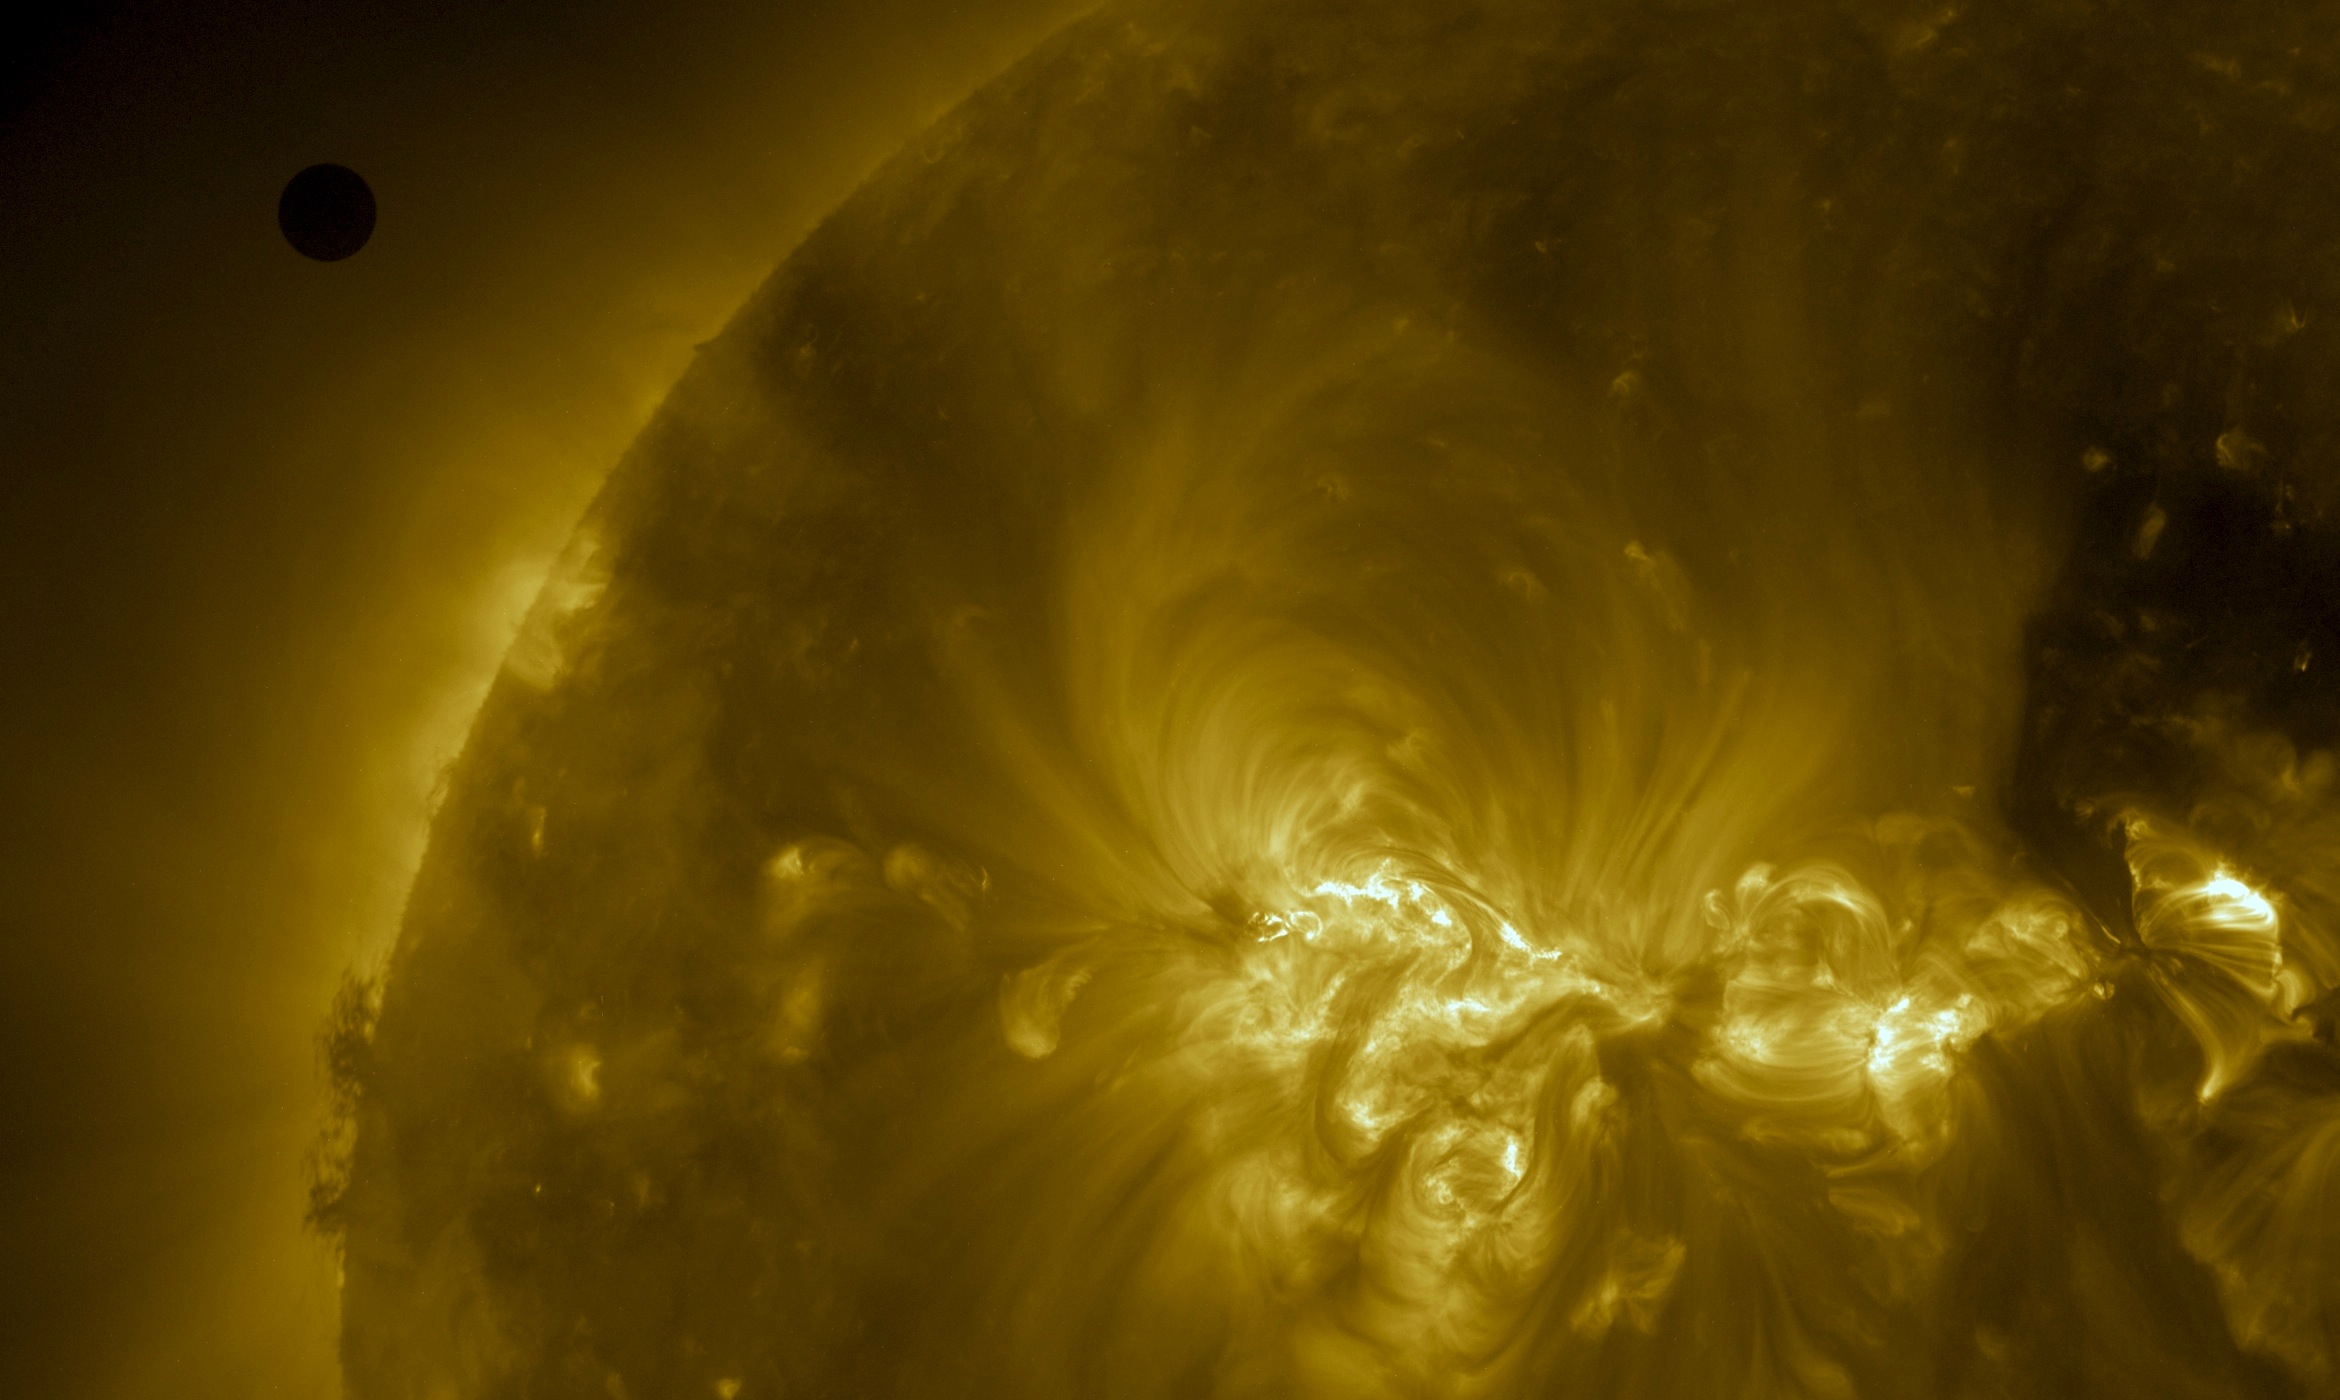 193 angstrom image from SDO